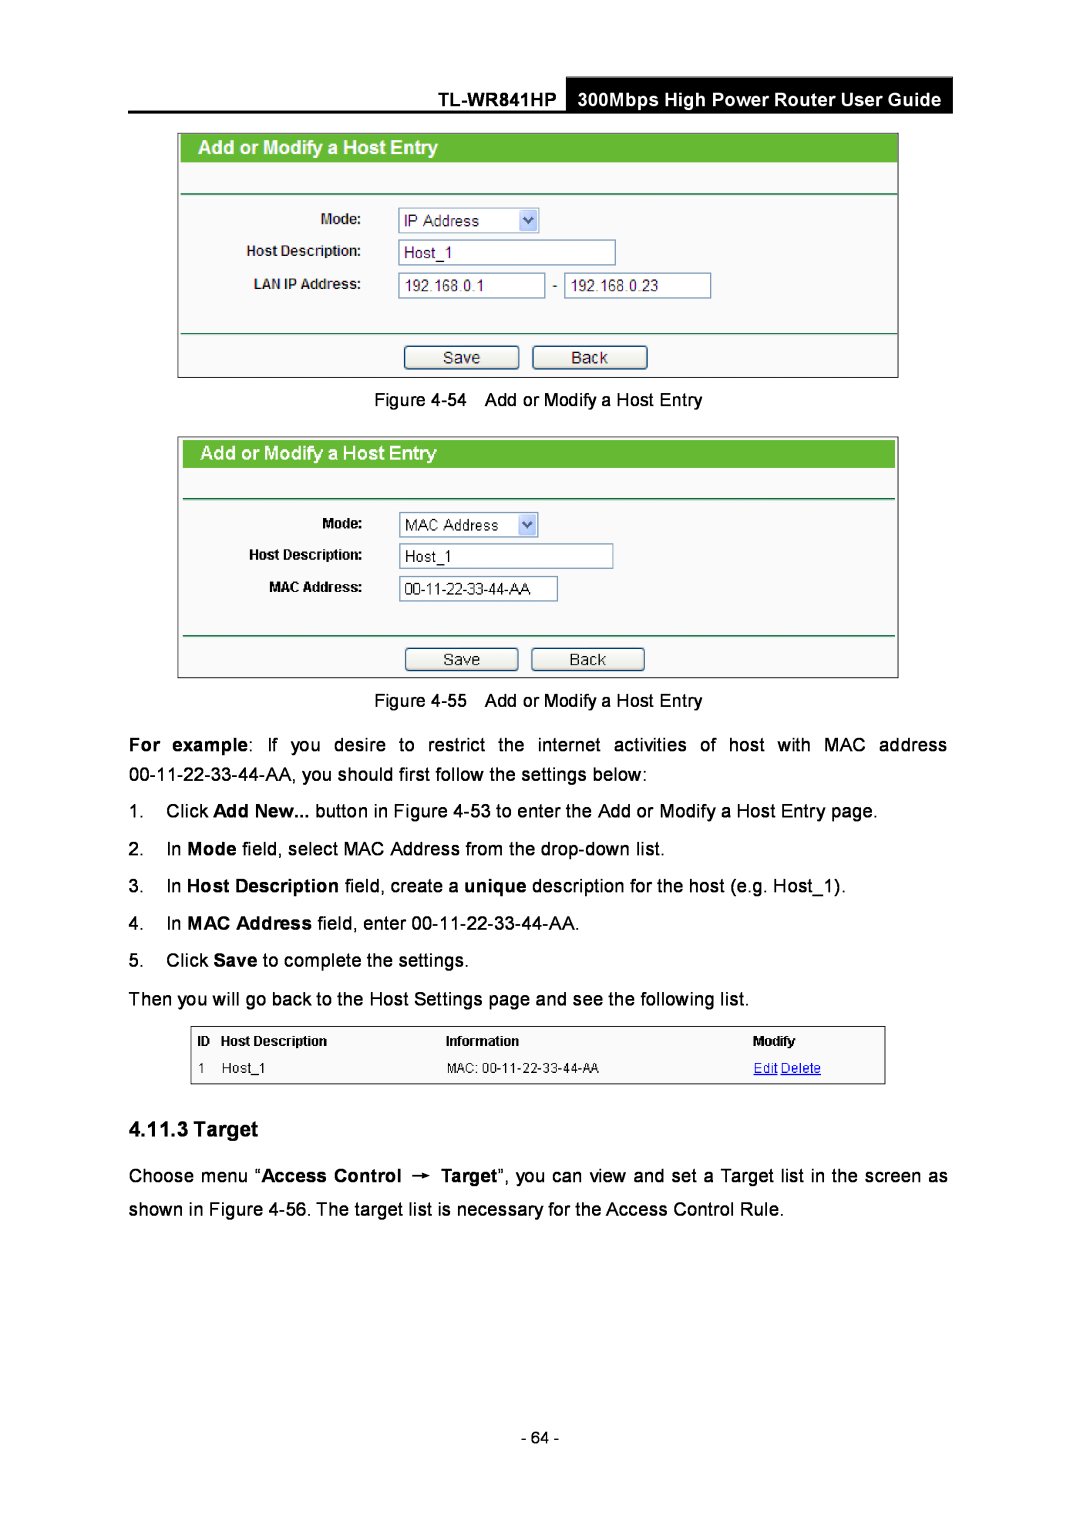 TP-Link Rev 1.0.0 1910010810 manual Target, TL-WR841HP 300Mbps High Power Router User Guide 